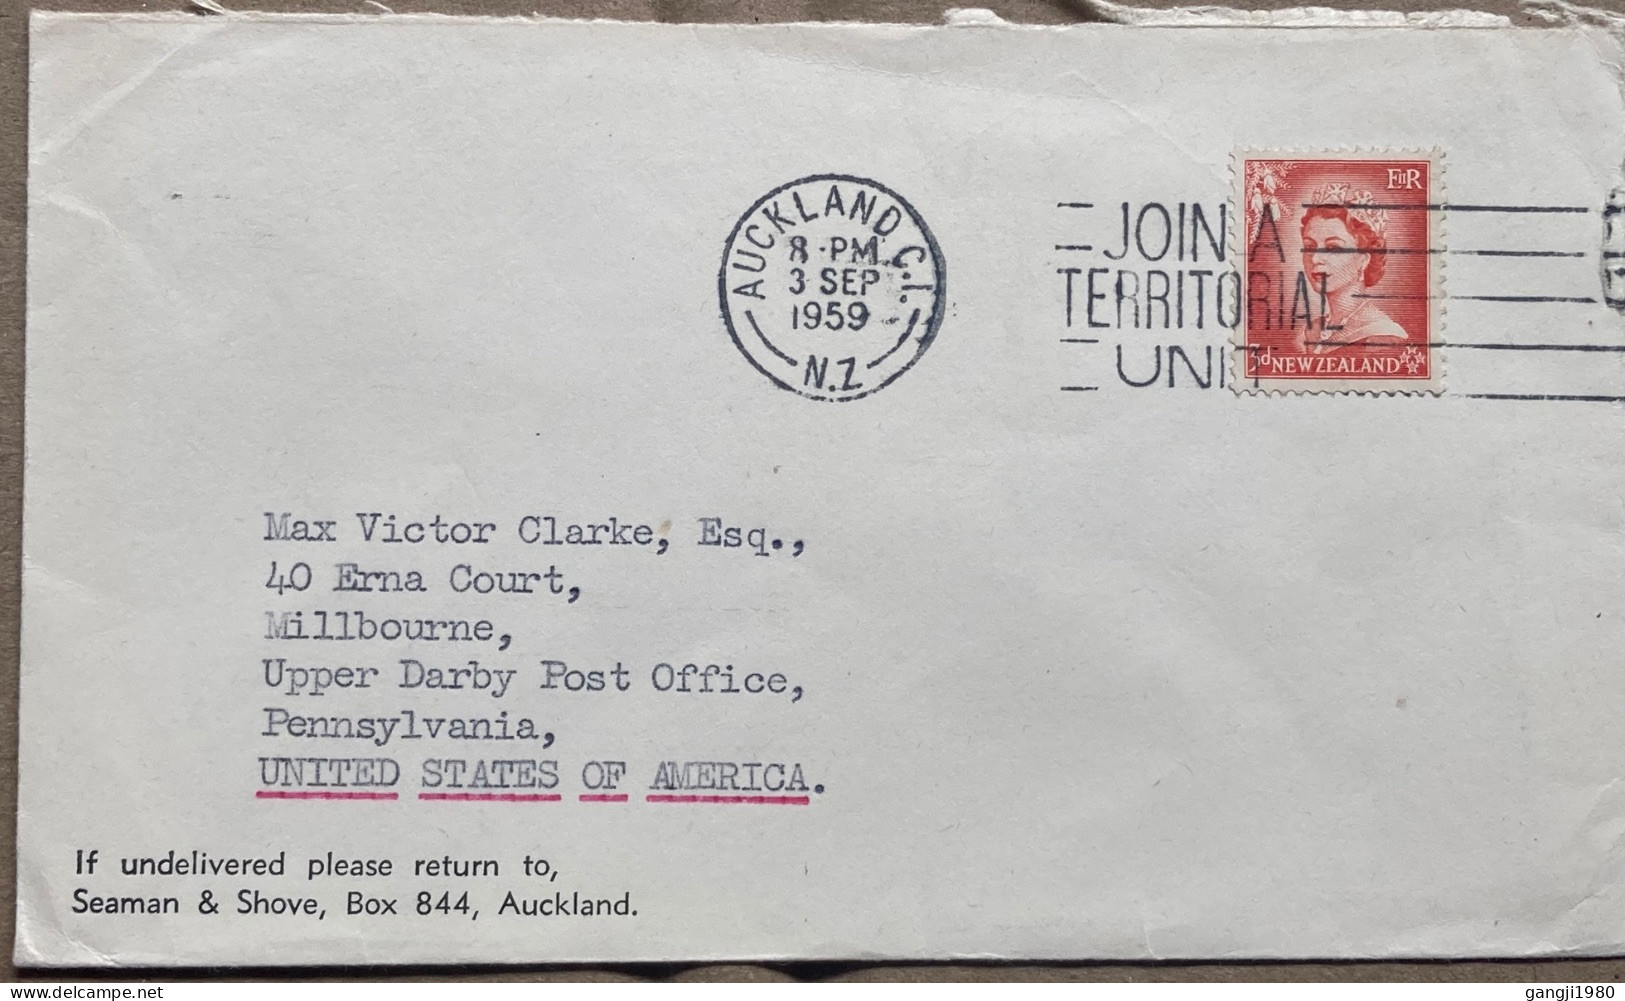 NEW ZEALAND 1959, COVER USED TO USA, FIRM SEAMAN & SHOVE, AUCKLAND CITY SLOGAN CANCEL, JOIN A TERRITORIAL UNIT, QUEEN ST - Covers & Documents